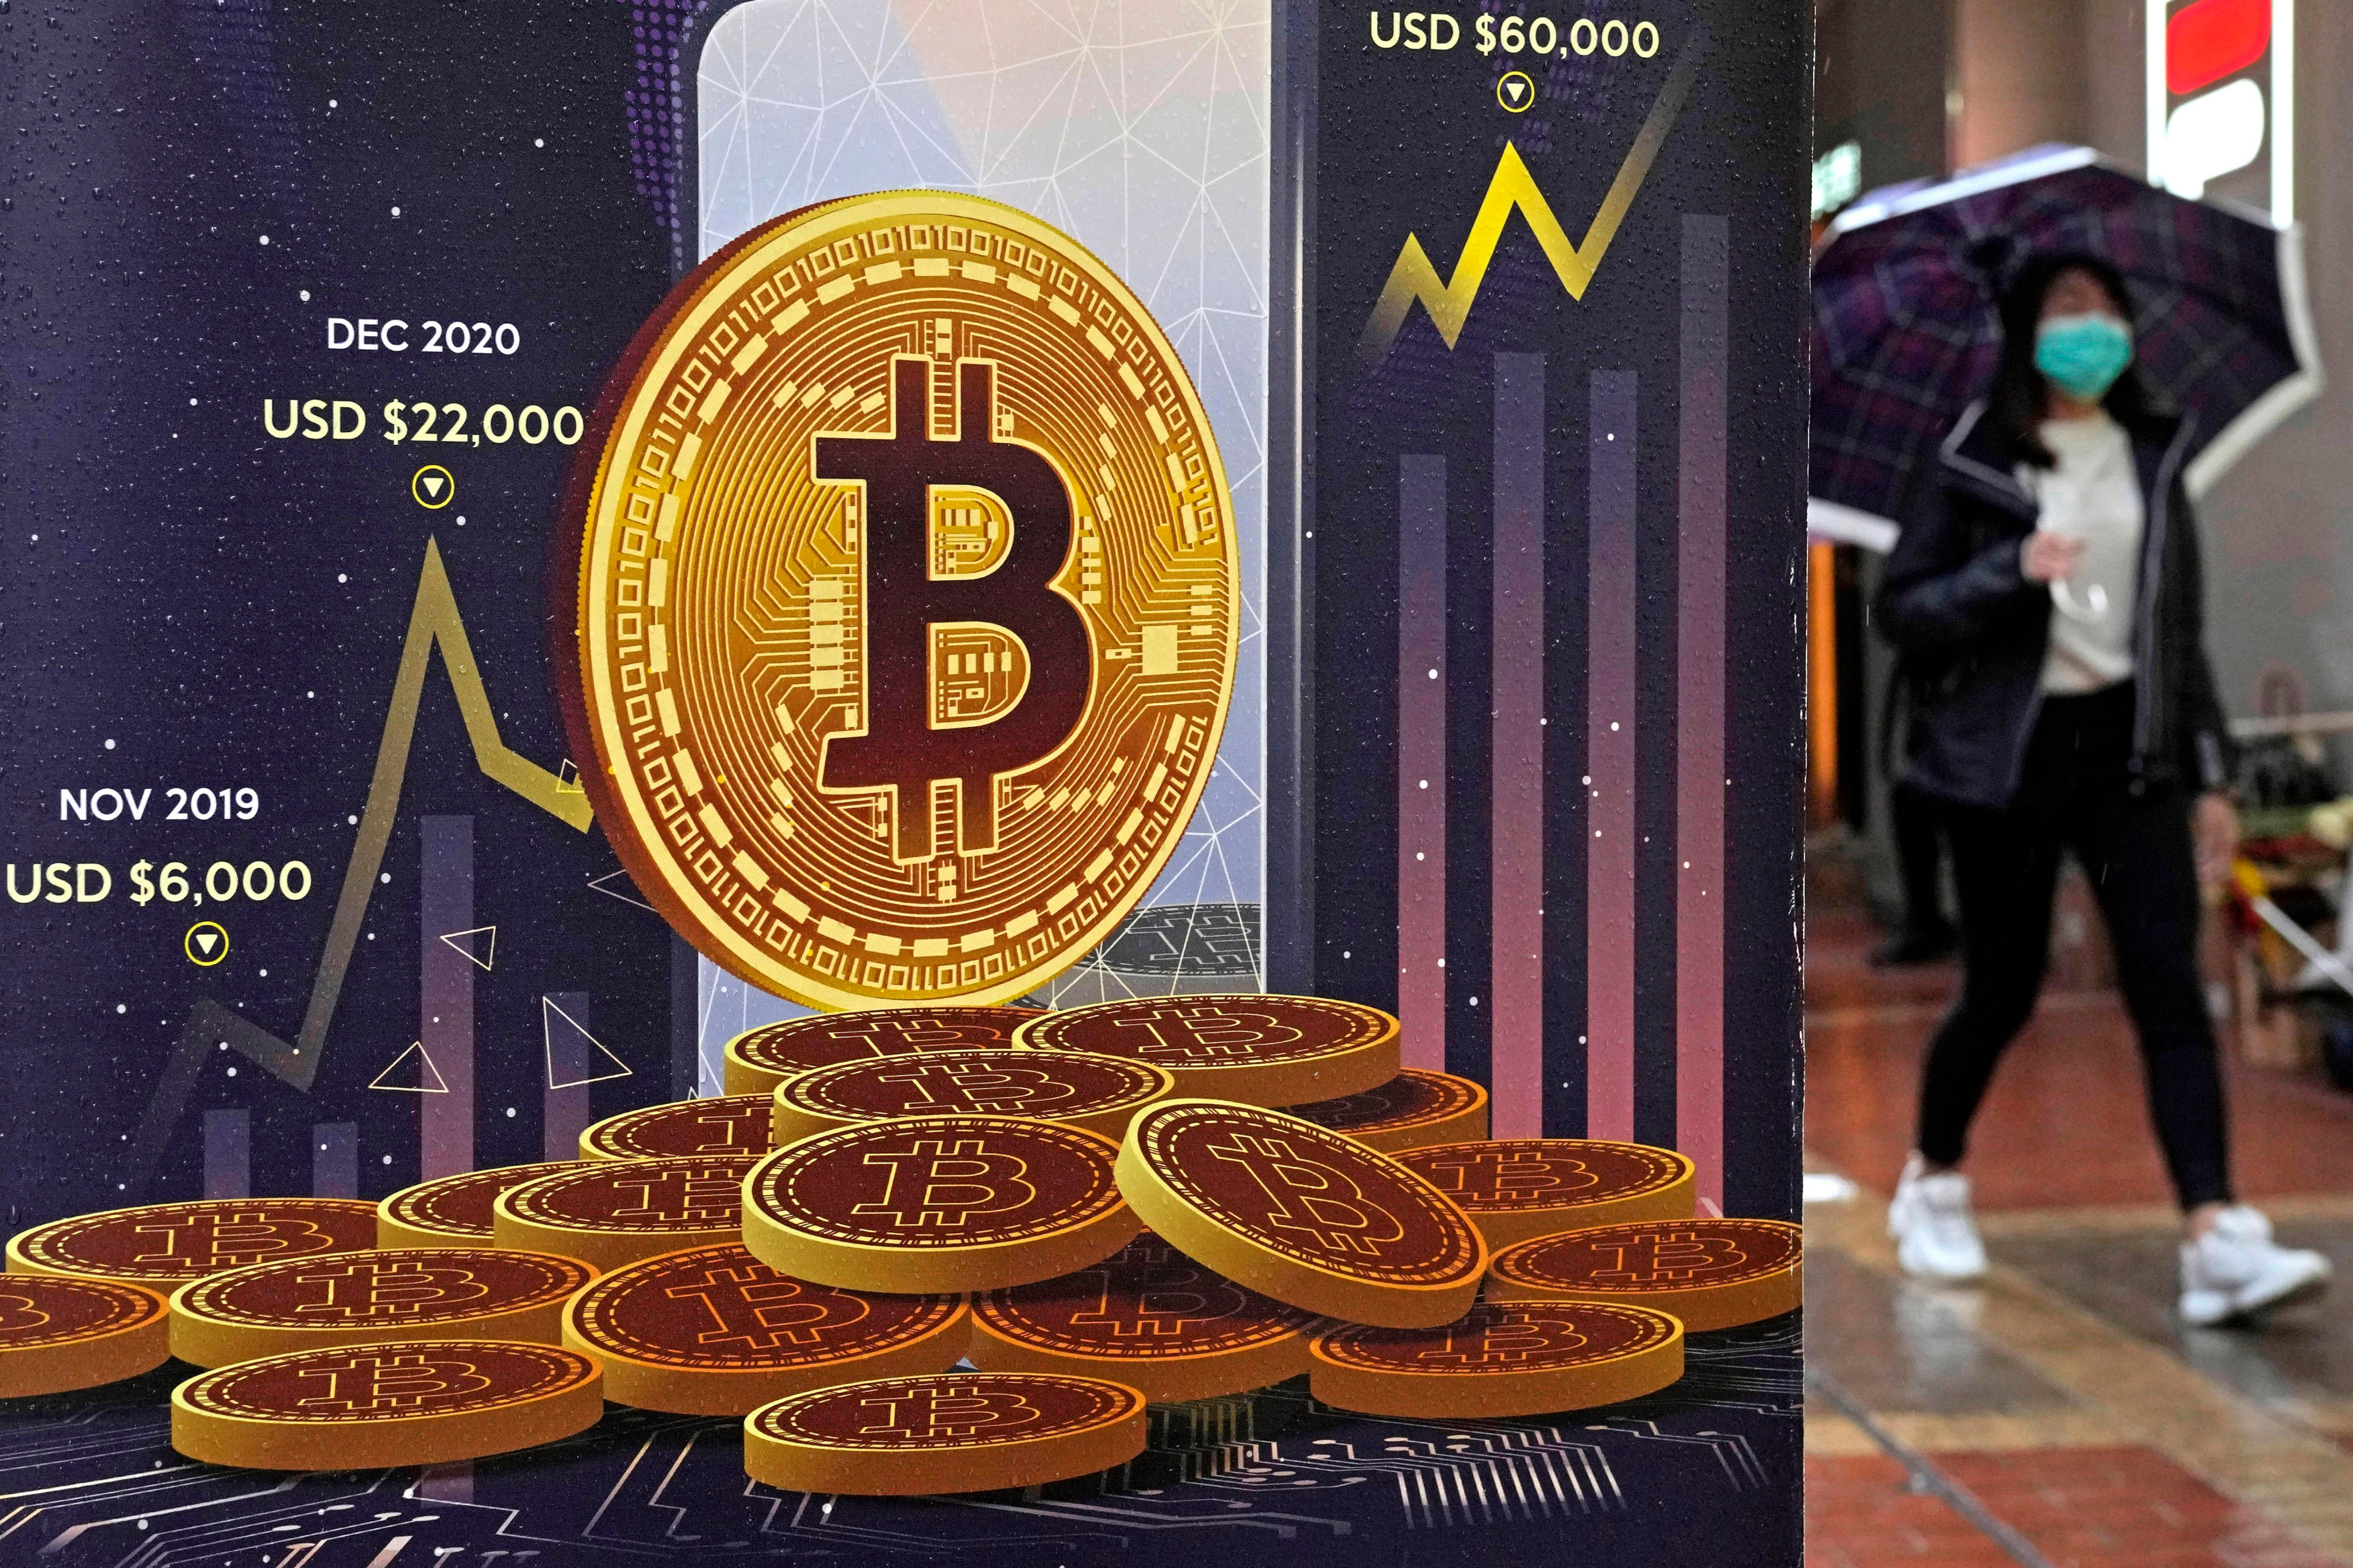 An advertisement for Bitcoin cryptocurrency is displayed on a street in Hong Kong. Bitcoin rose by as much as 4.8 per cent to a record US$71,677 in European trading, bringing gains for the year so far to 70 per cent. Photo: AP